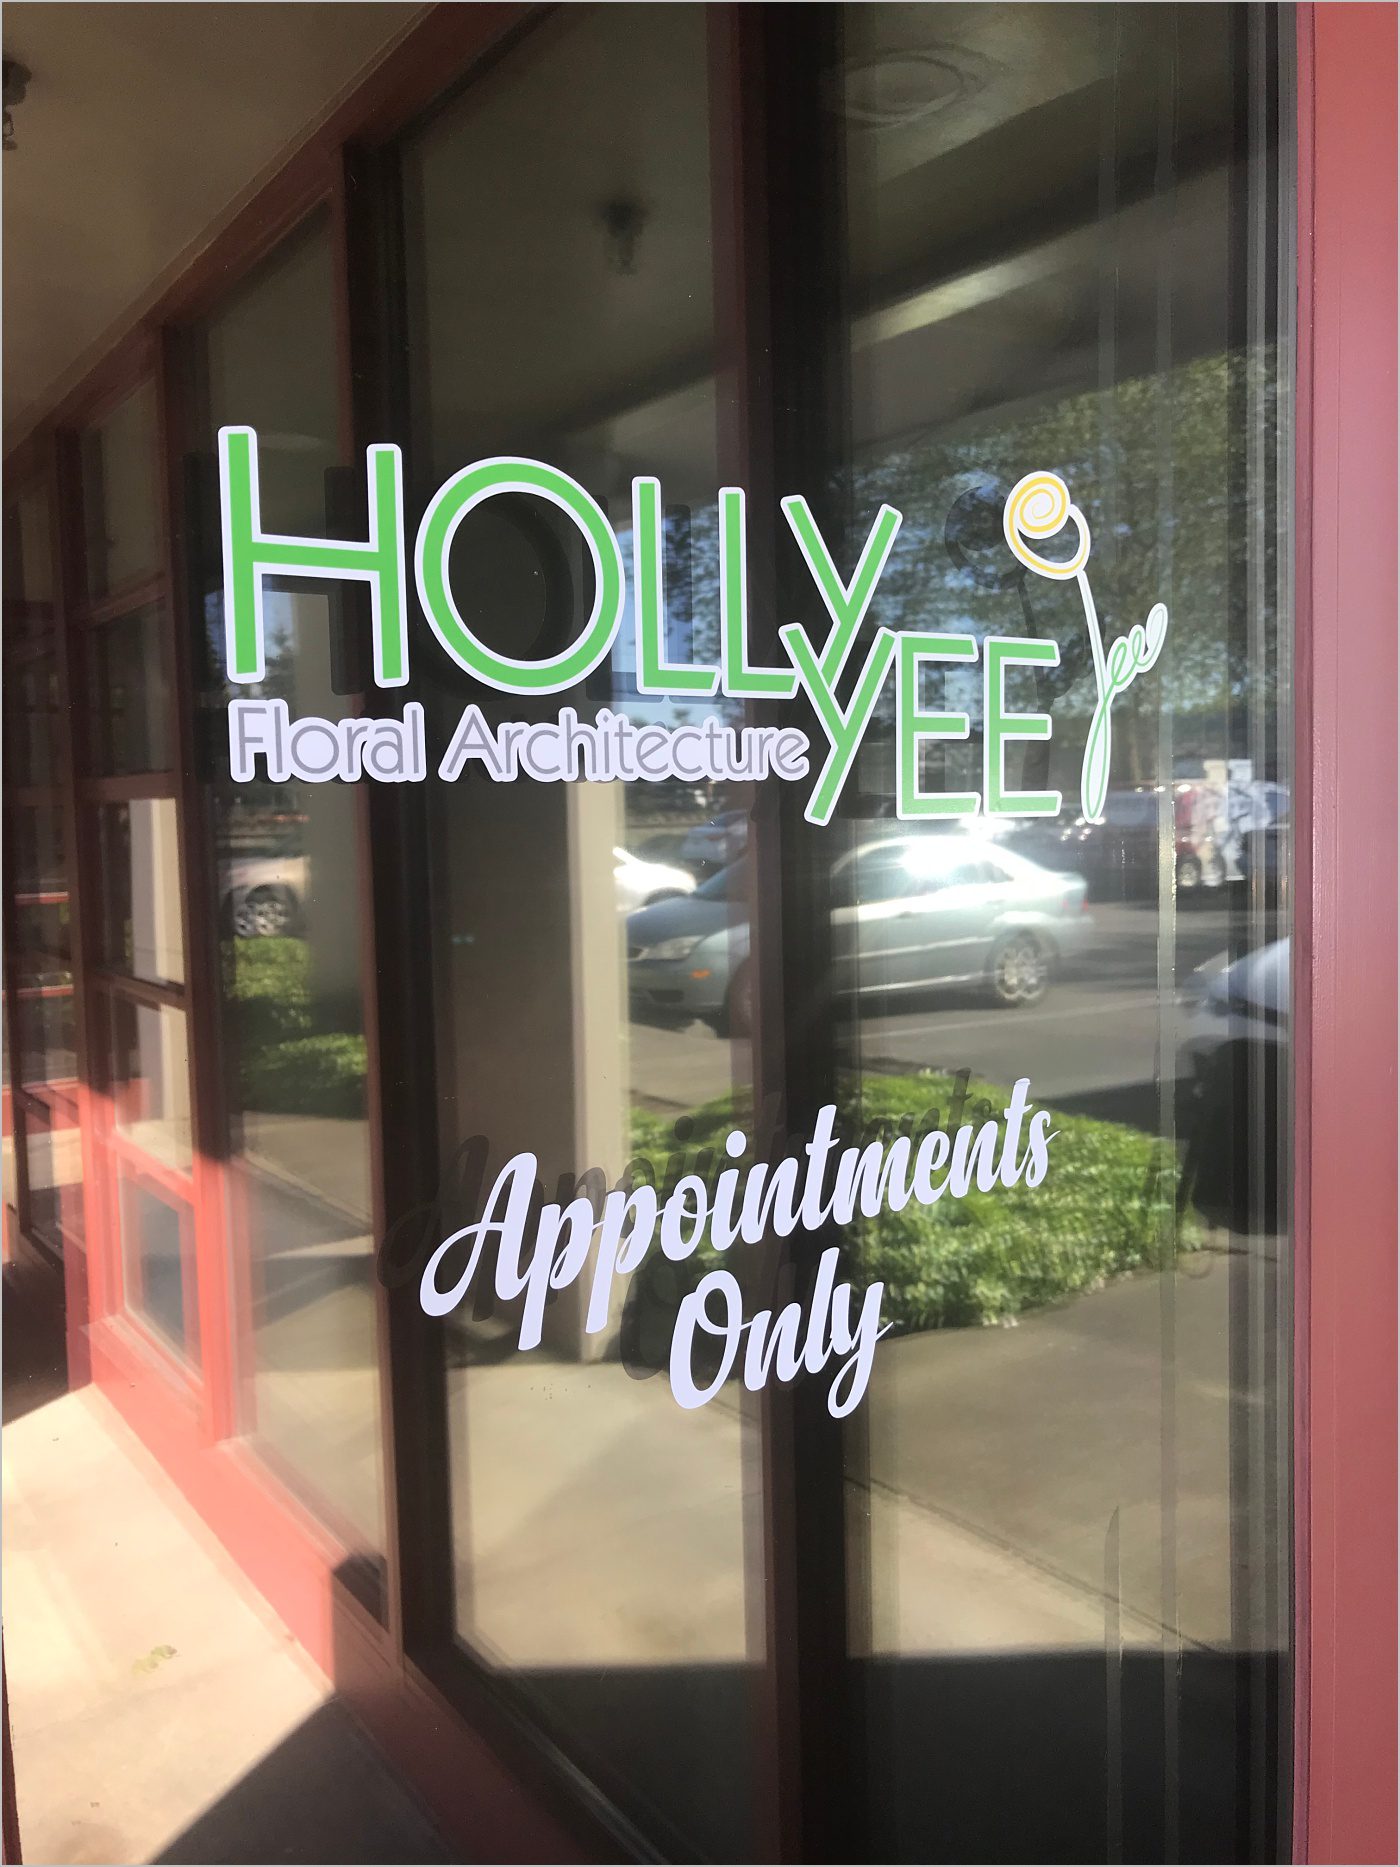 window decal of holly yee floral architecture